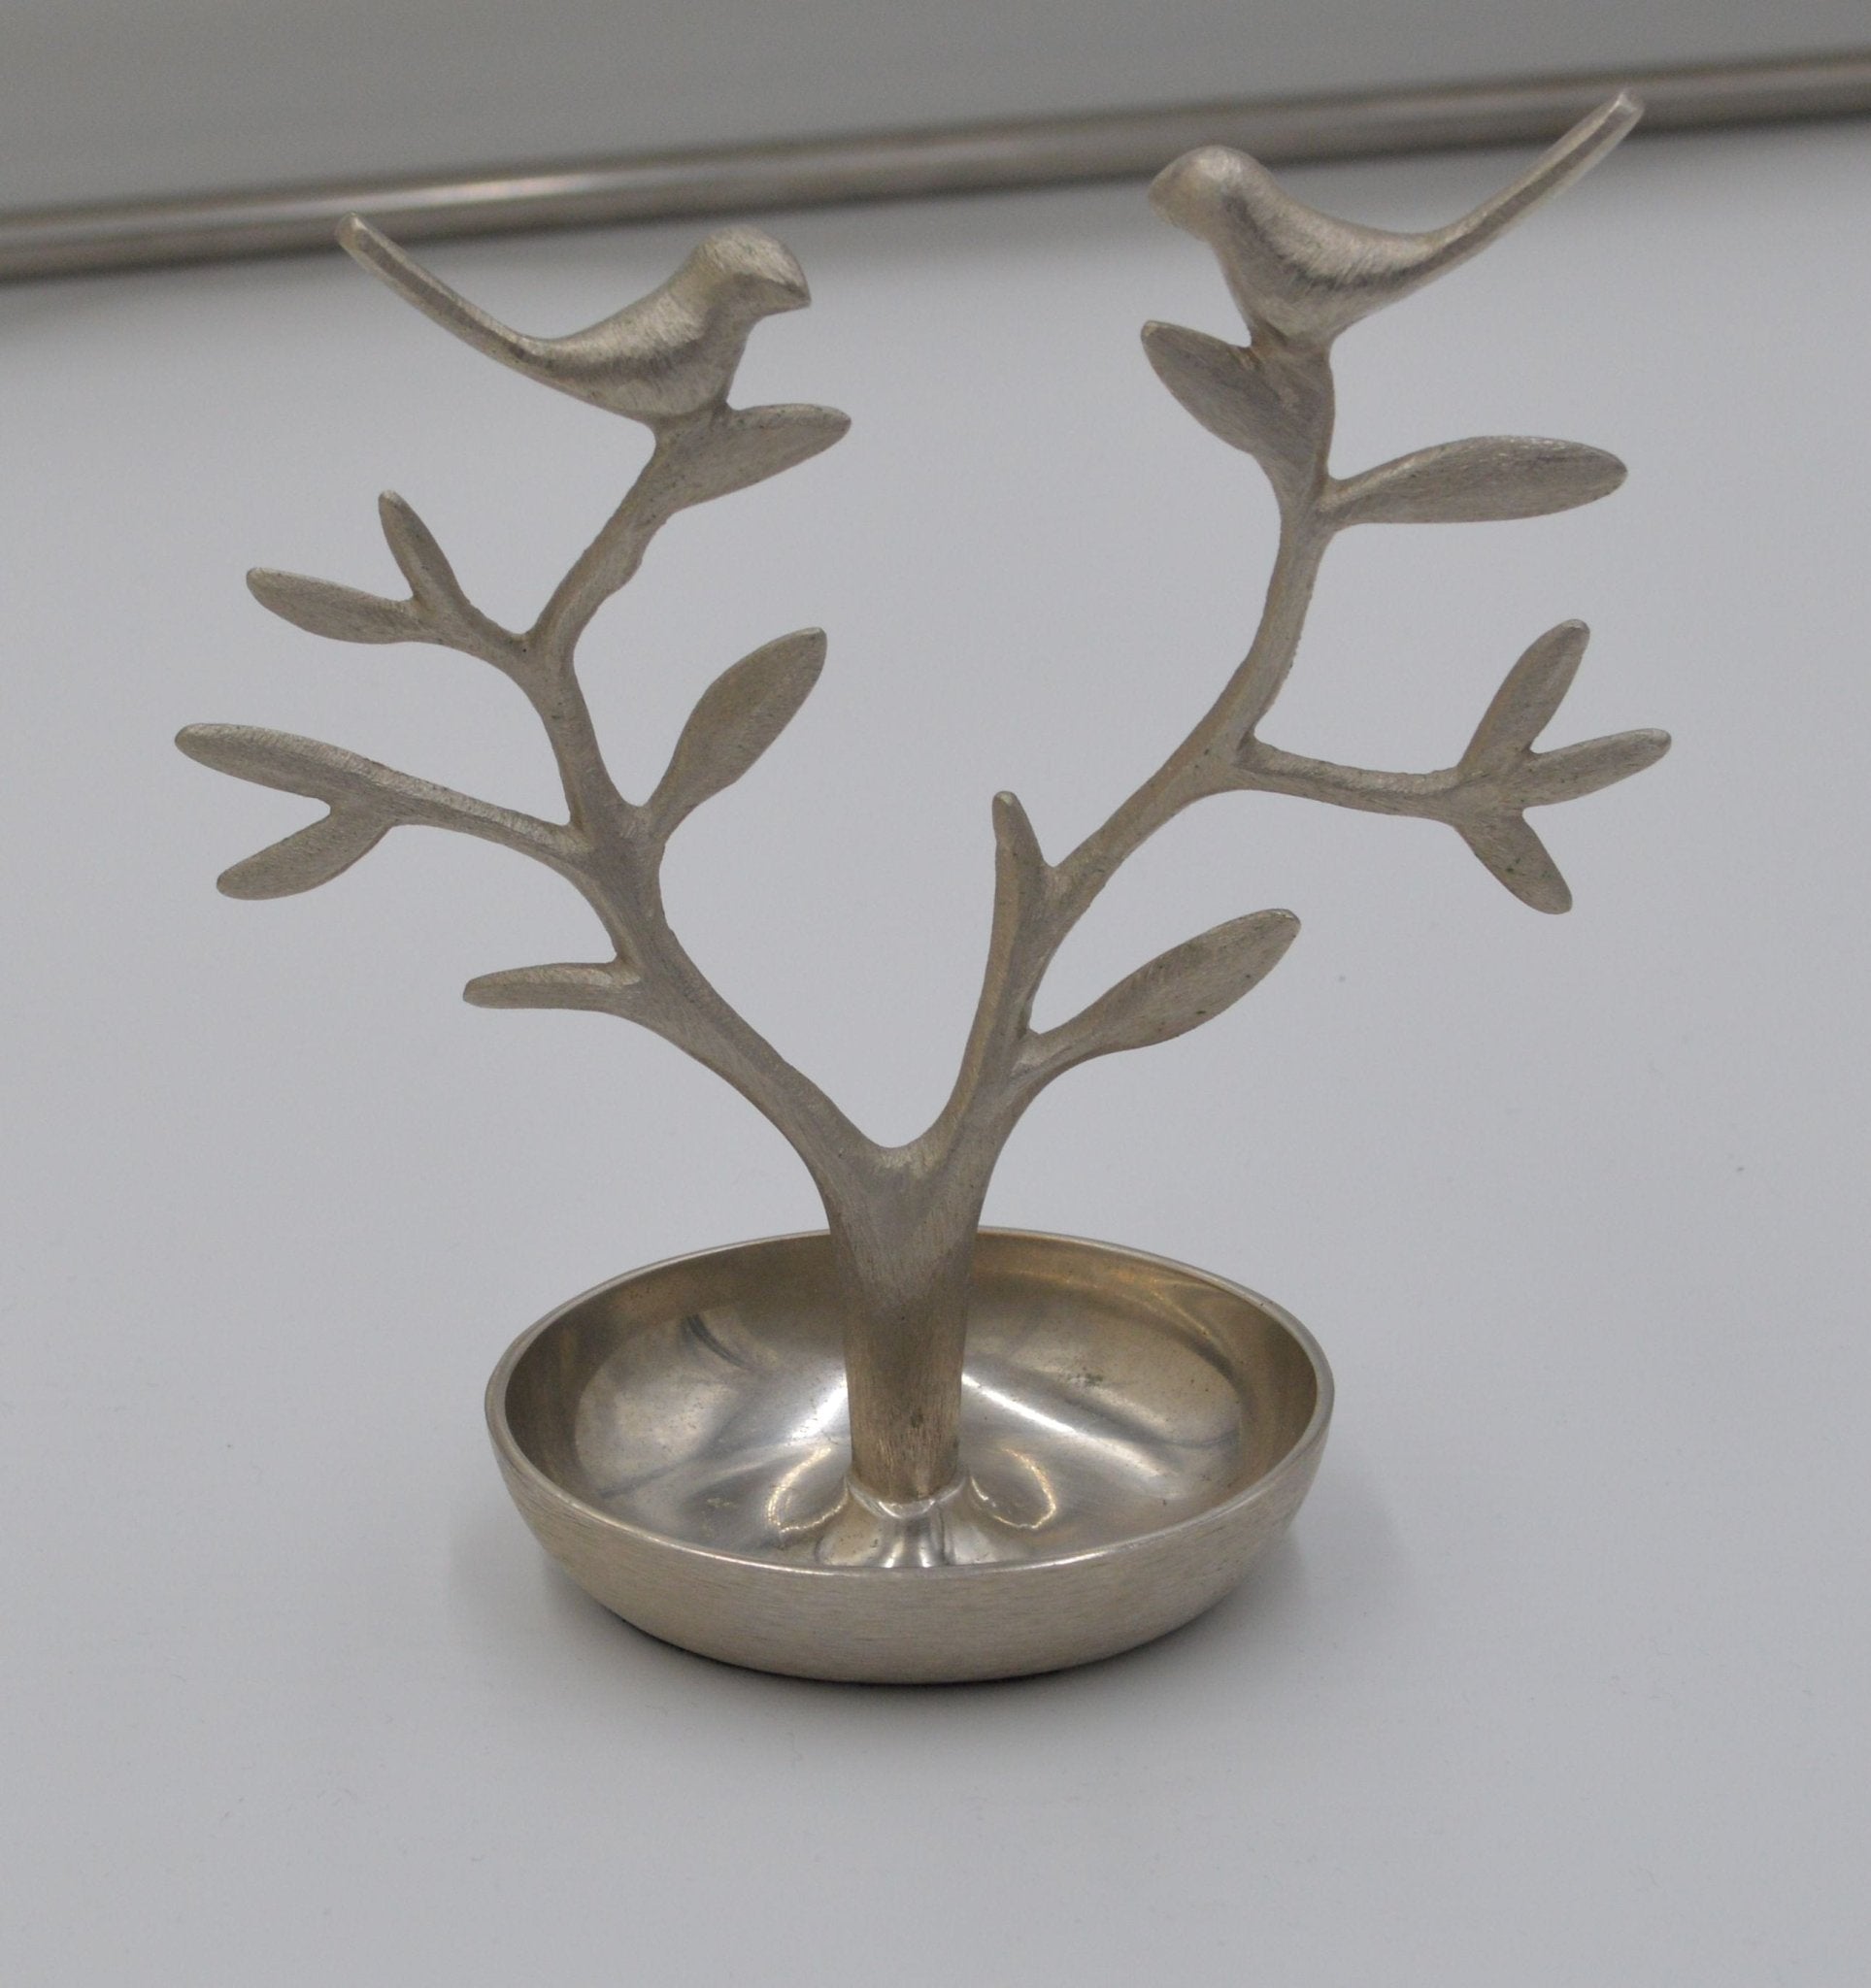 VINTAGE RED ENVELOPE SILVER METAL JEWELLERY TREE WITH BIRDS(PREVIOUSLY OWNED) VERY GOOD CONDITION - TMD167207